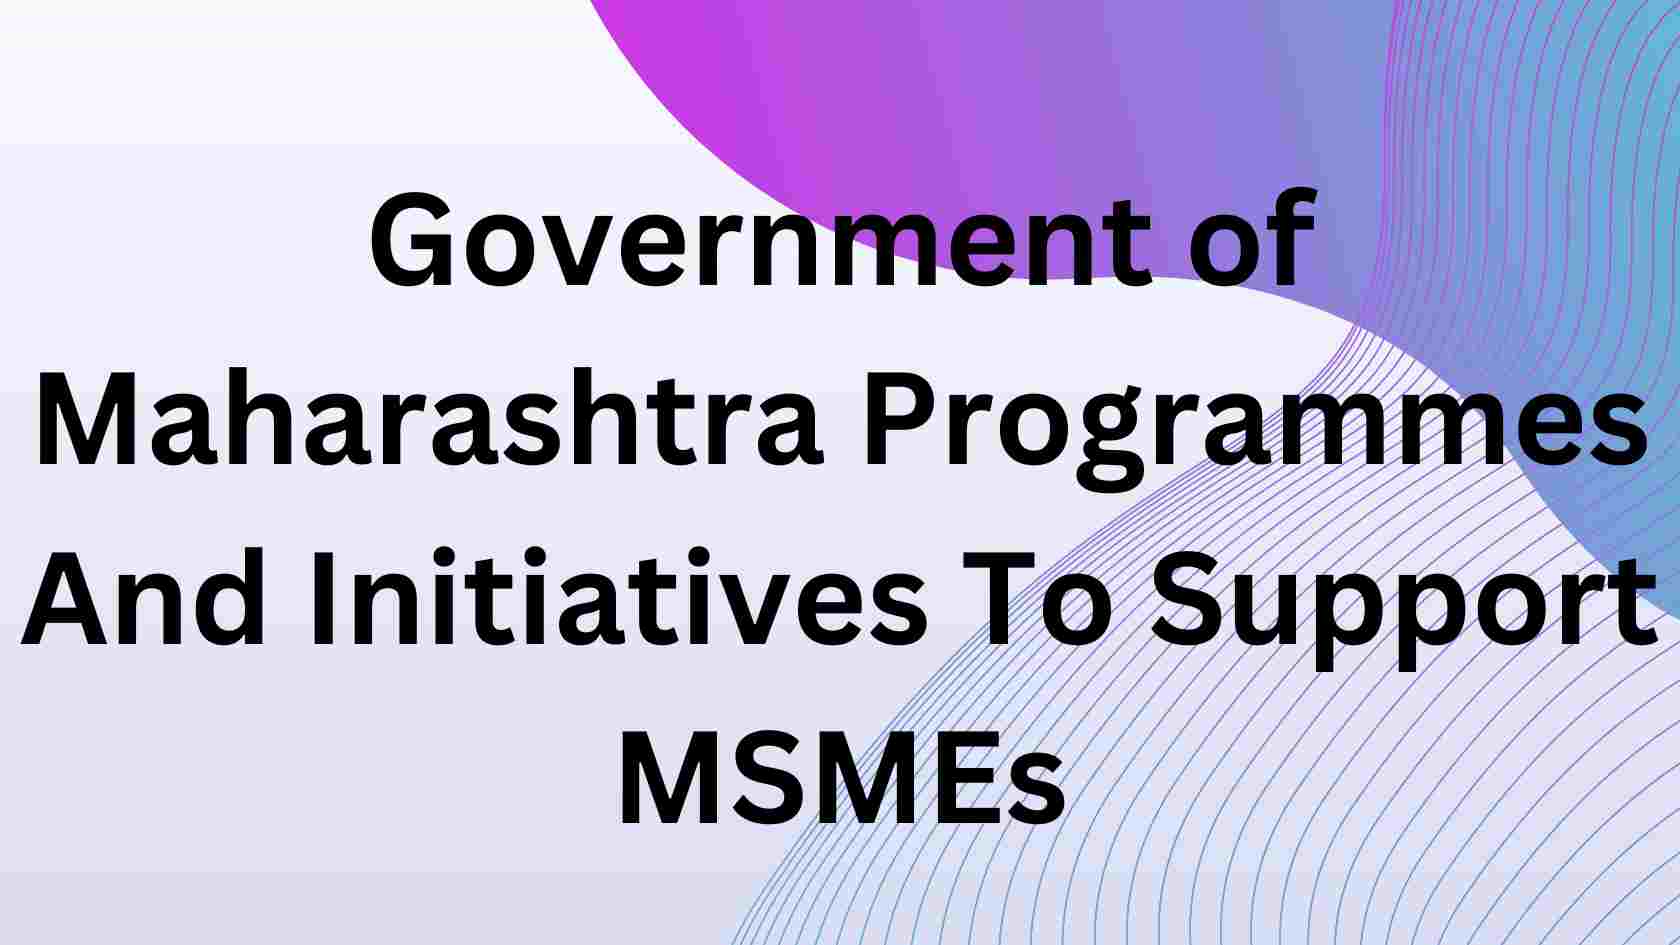 Government of Maharashtra Programmes And Initiatives To Support MSMEs